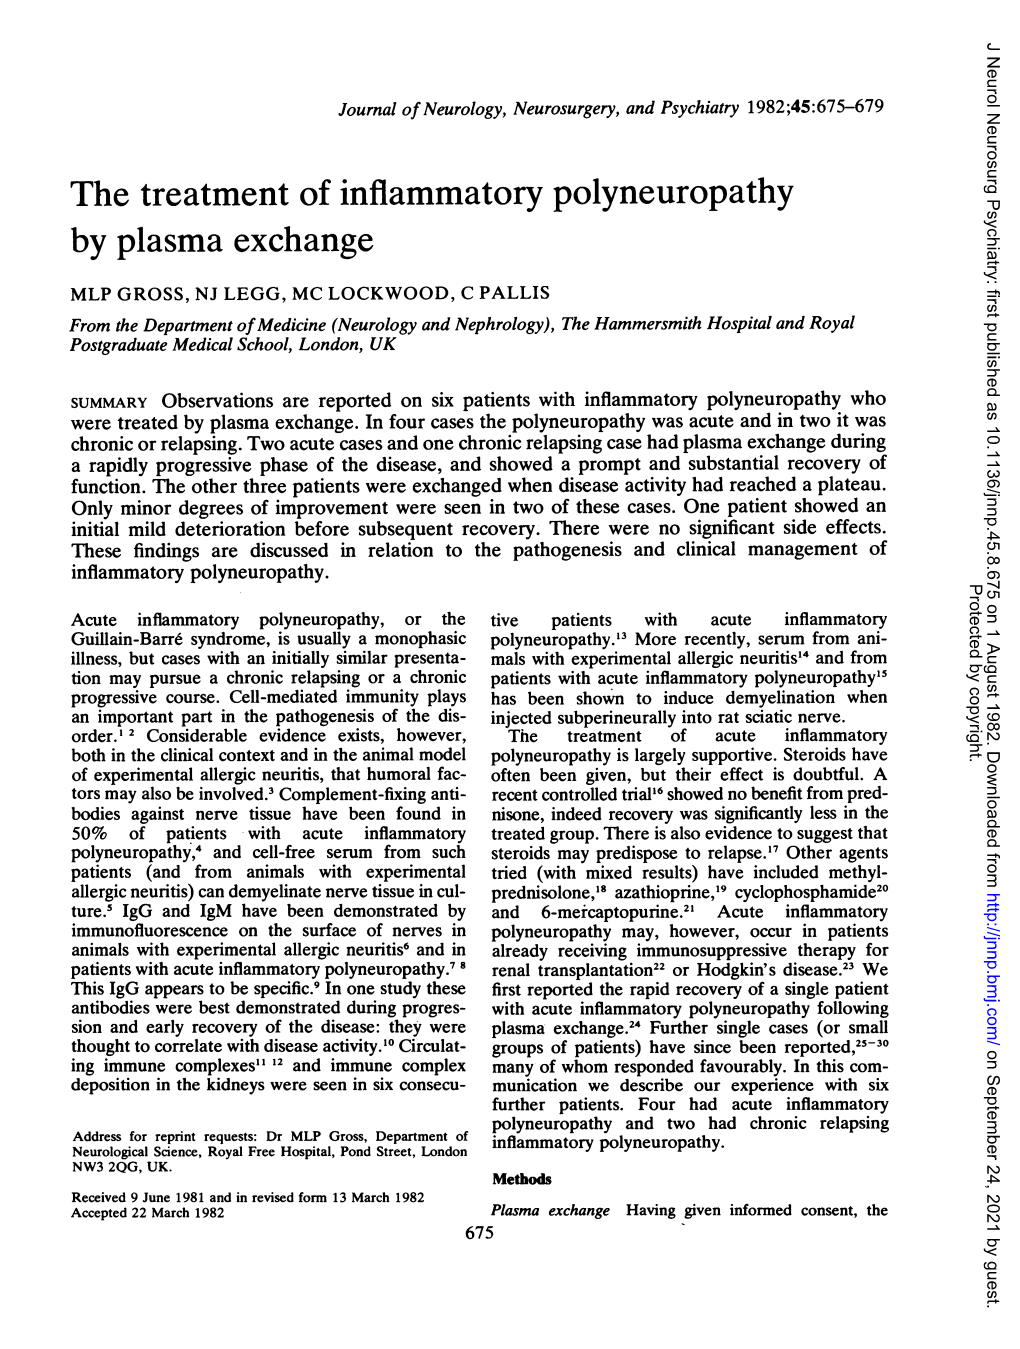 The Treatment of Inflammatory Polyneuropathy by Plasma Exchange